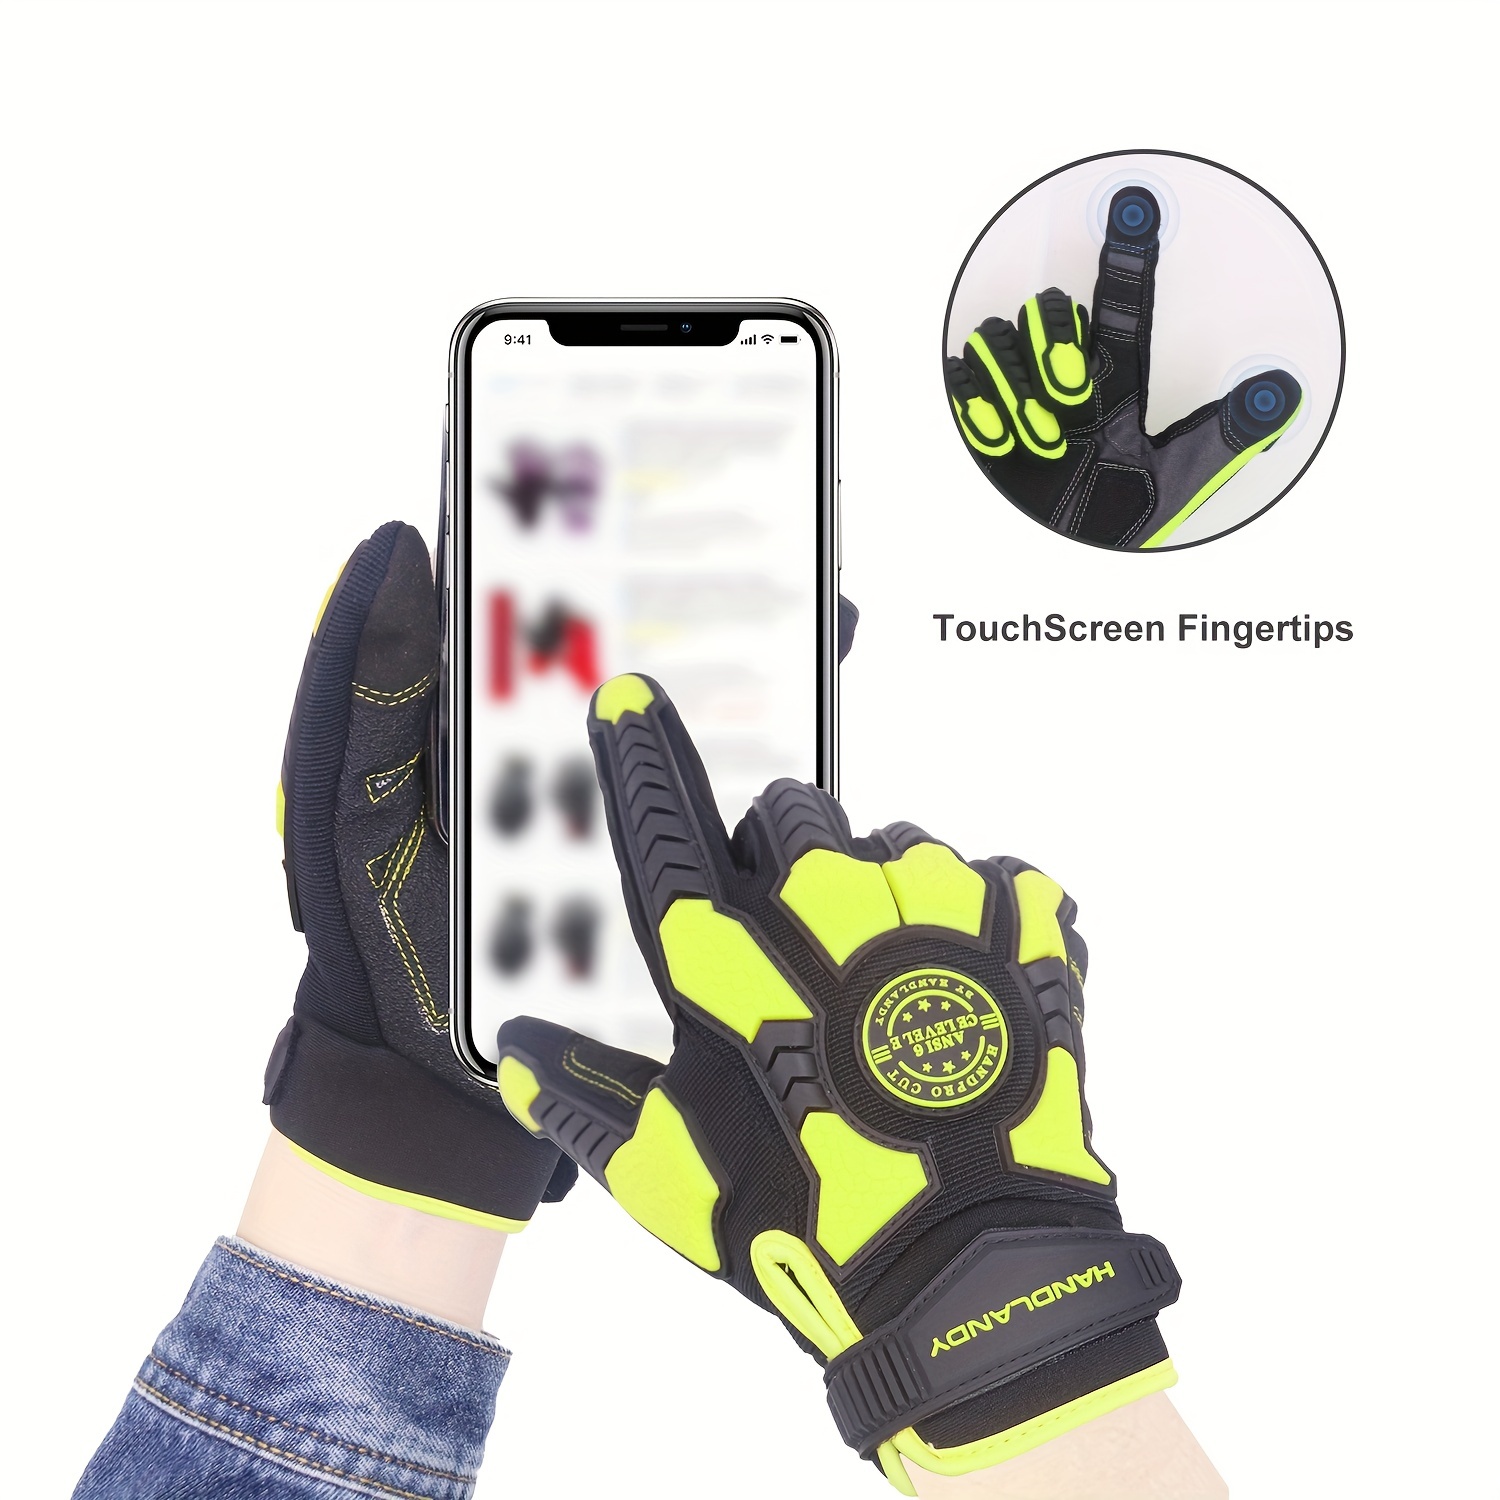 Cut Resistant Gloves Impact Protection for Shucking Yard Plumbing Hand  Protection Men